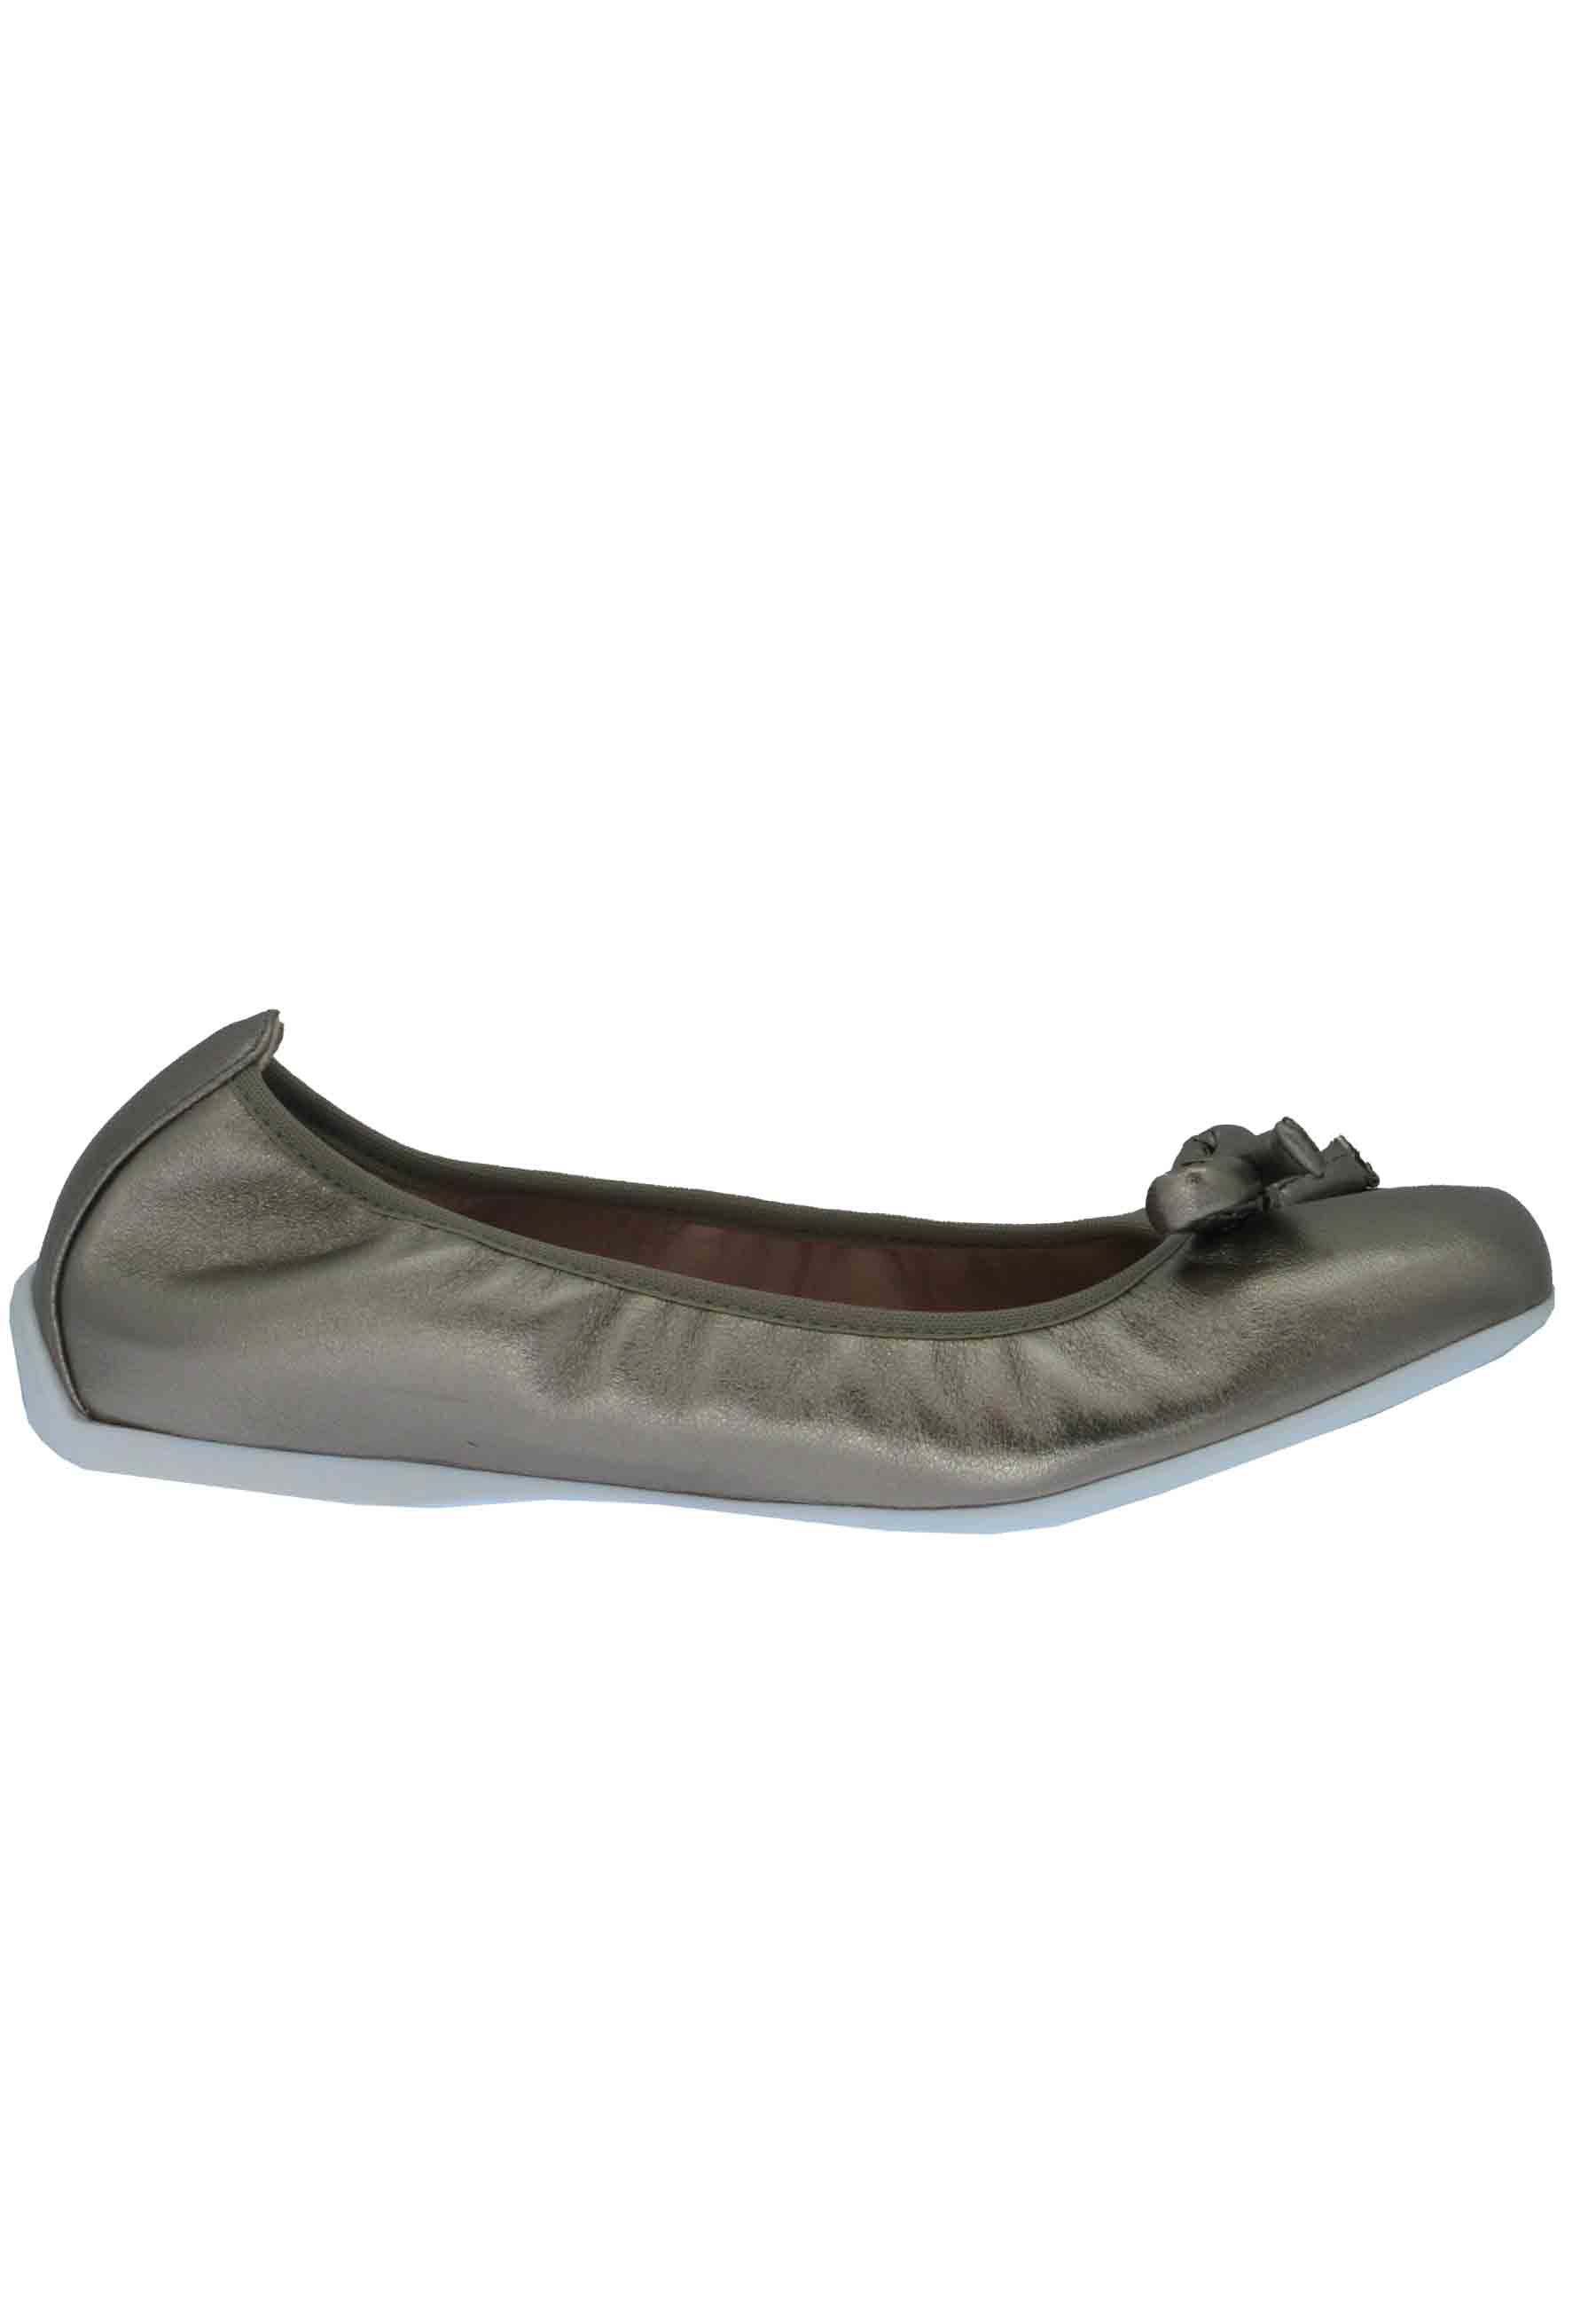 Aleda women's ballet flats in bronze leather and low rubber sole